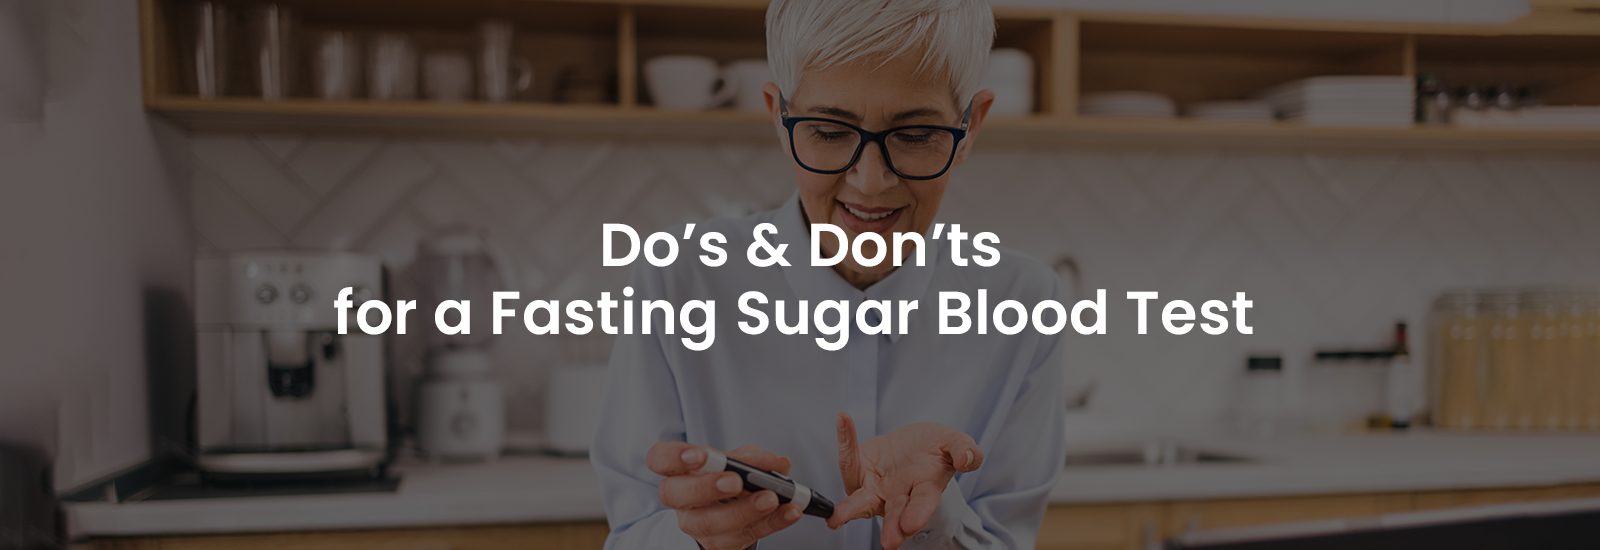 Do’s & Don’ts for a Fasting Sugar Blood Test | Banner Image